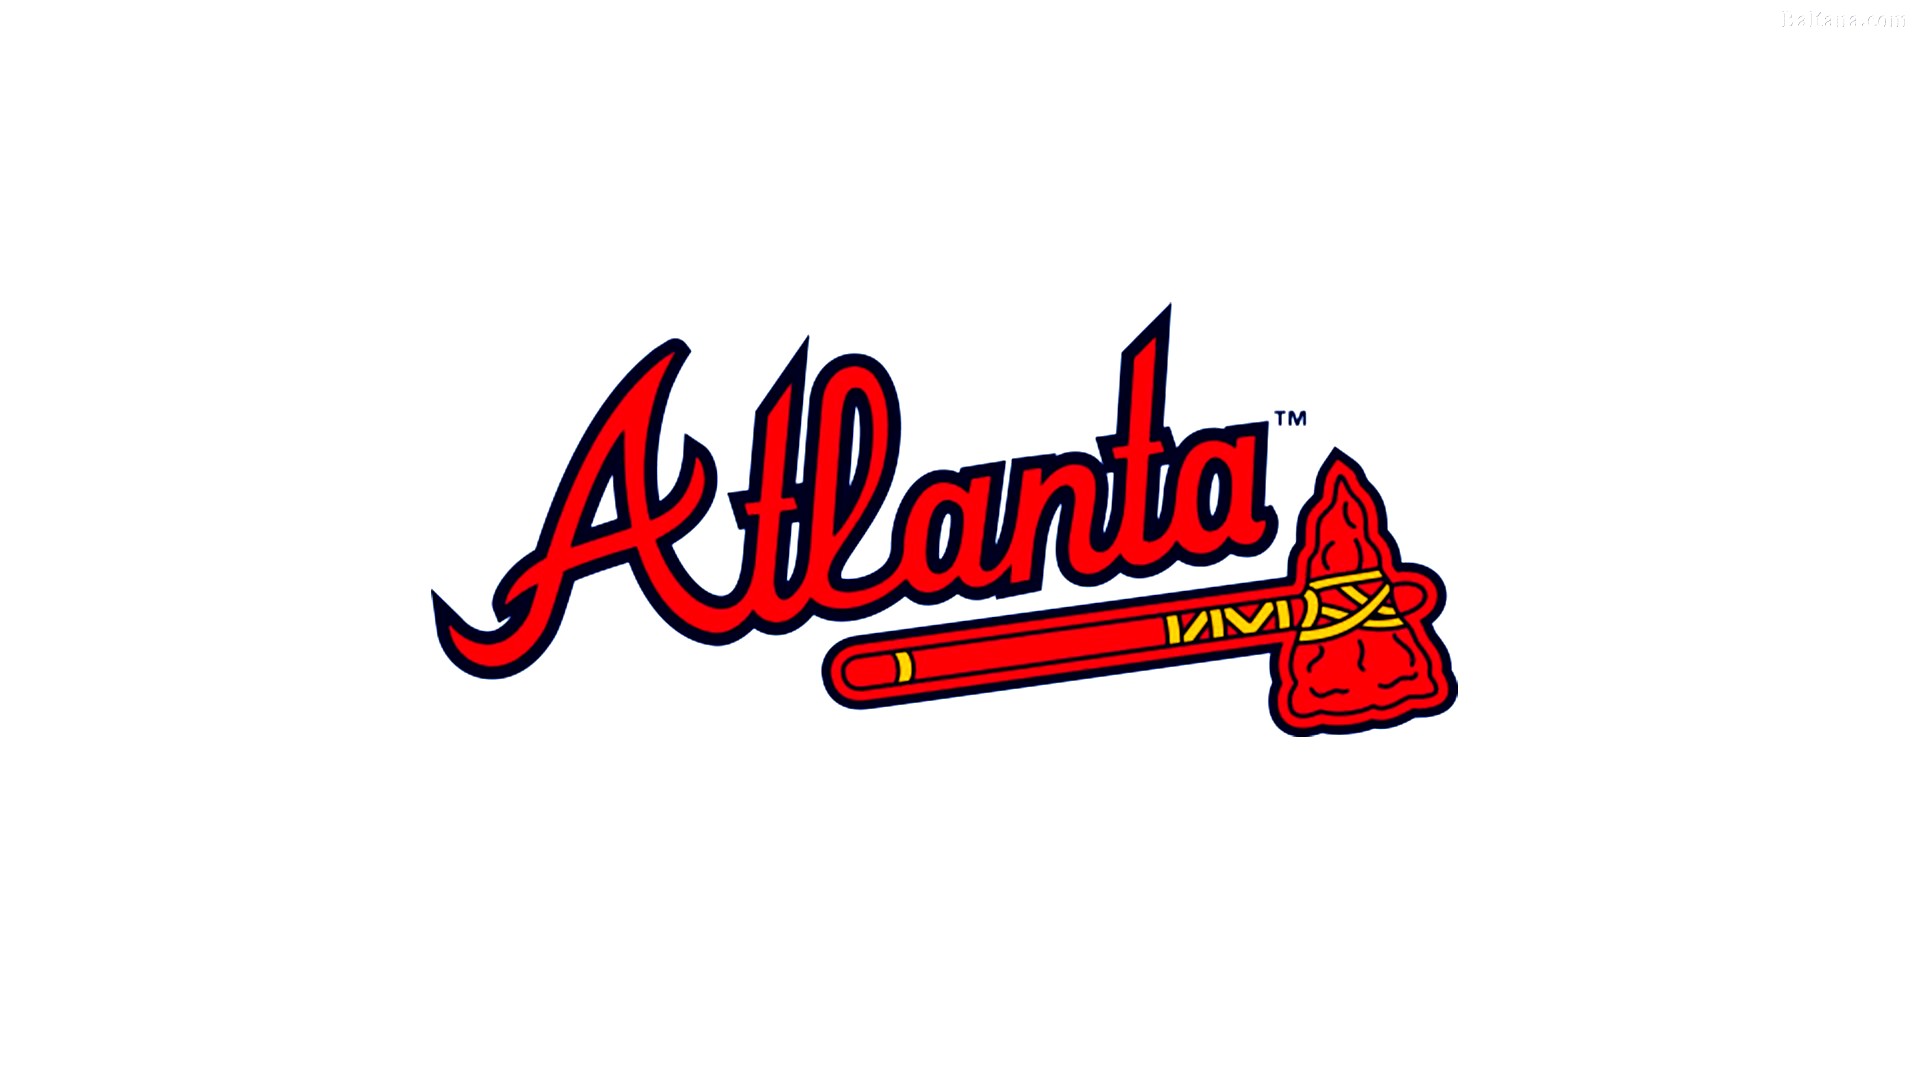 HD Backgrounds Atlanta Braves with high-resolution 1920x1080 pixel. You can use this wallpaper for Mac Desktop Wallpaper, Laptop Screensavers, Android Wallpapers, Tablet or iPhone Home Screen and another mobile phone device